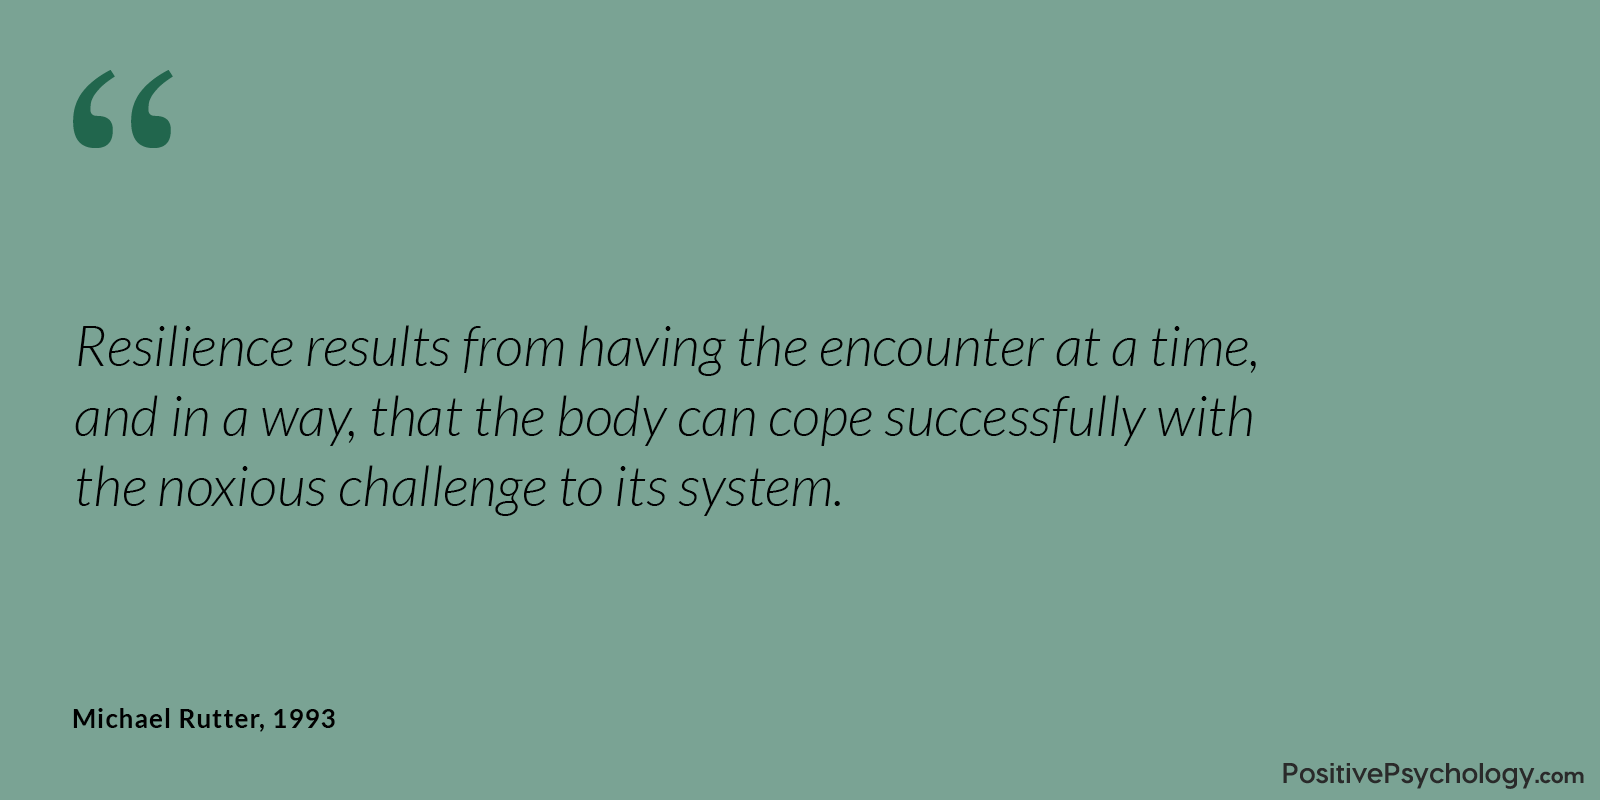 Rutter Resilience Body Cope Quote